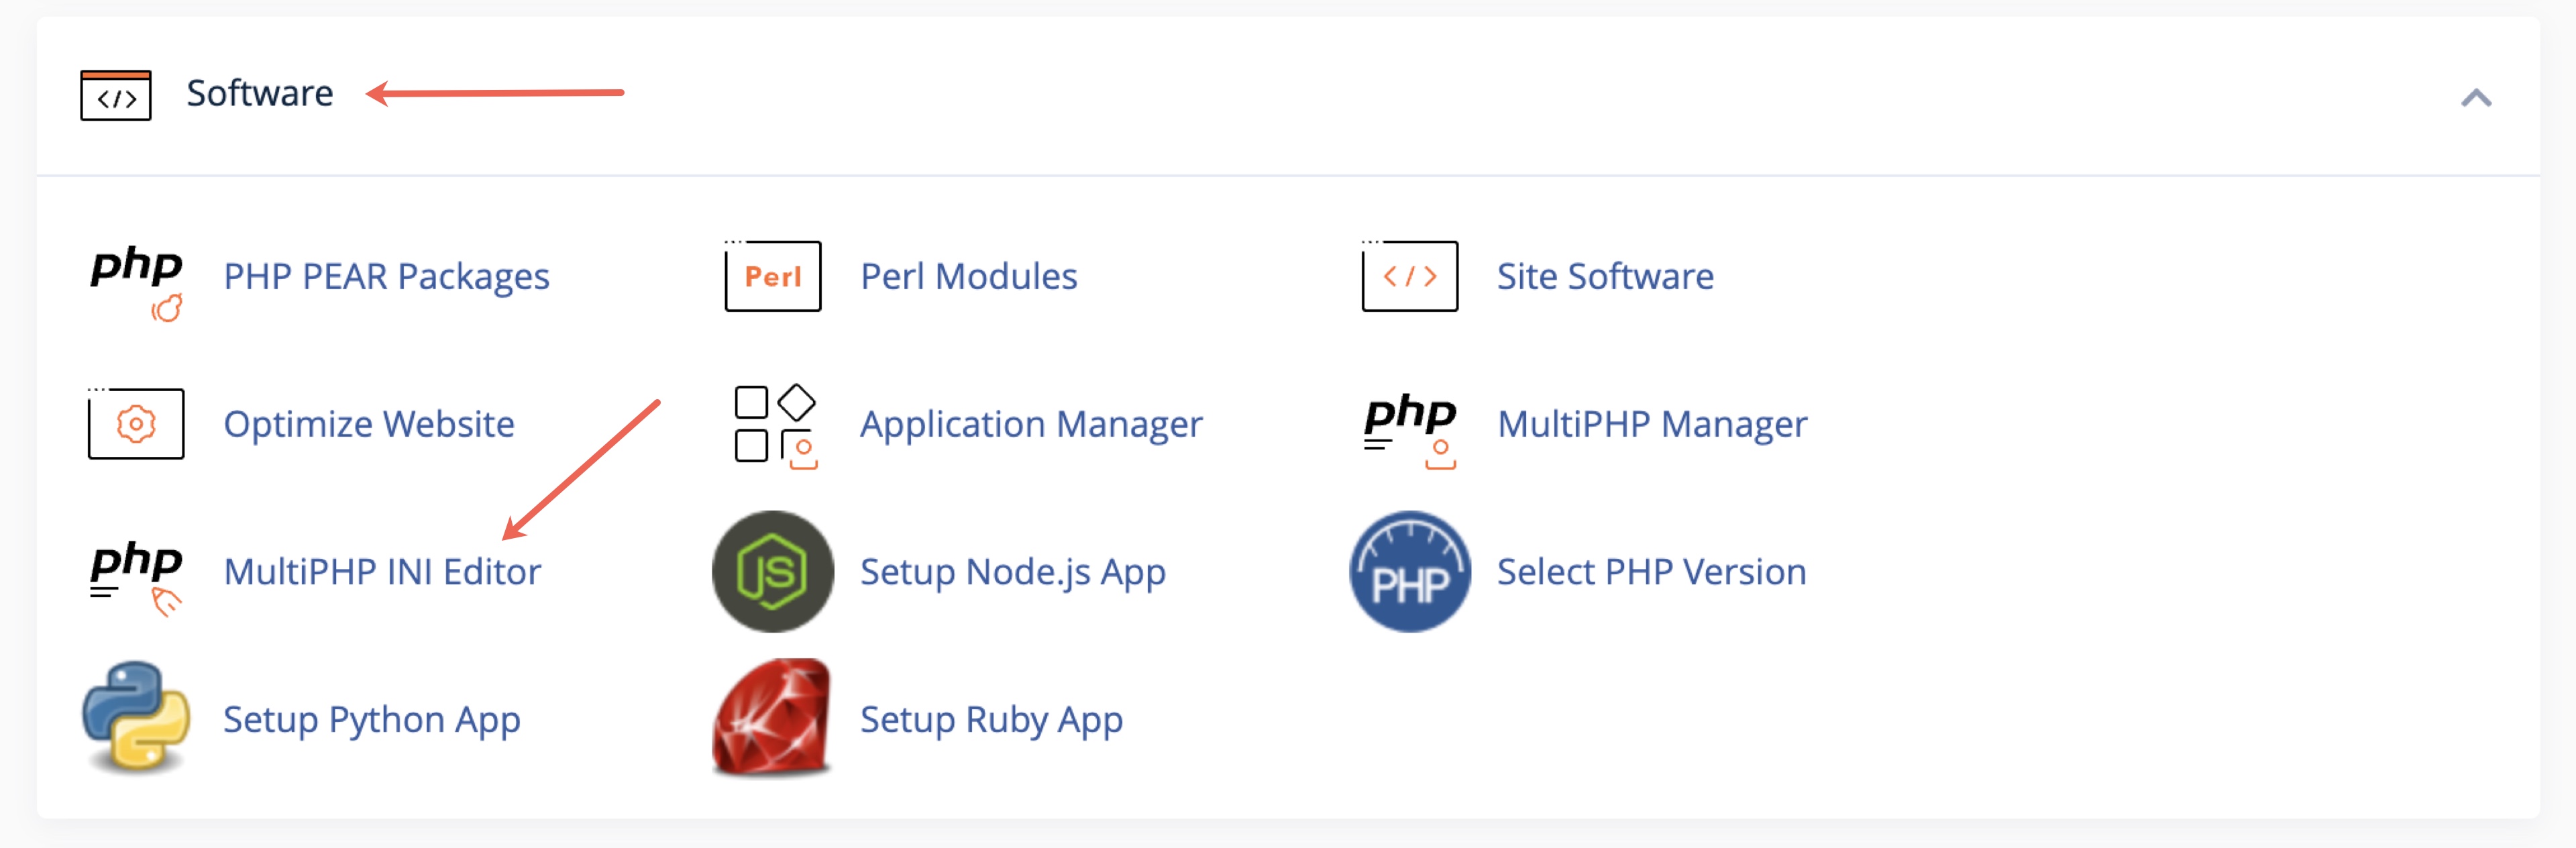 Figure 8: cPanel Dashboard Software Section